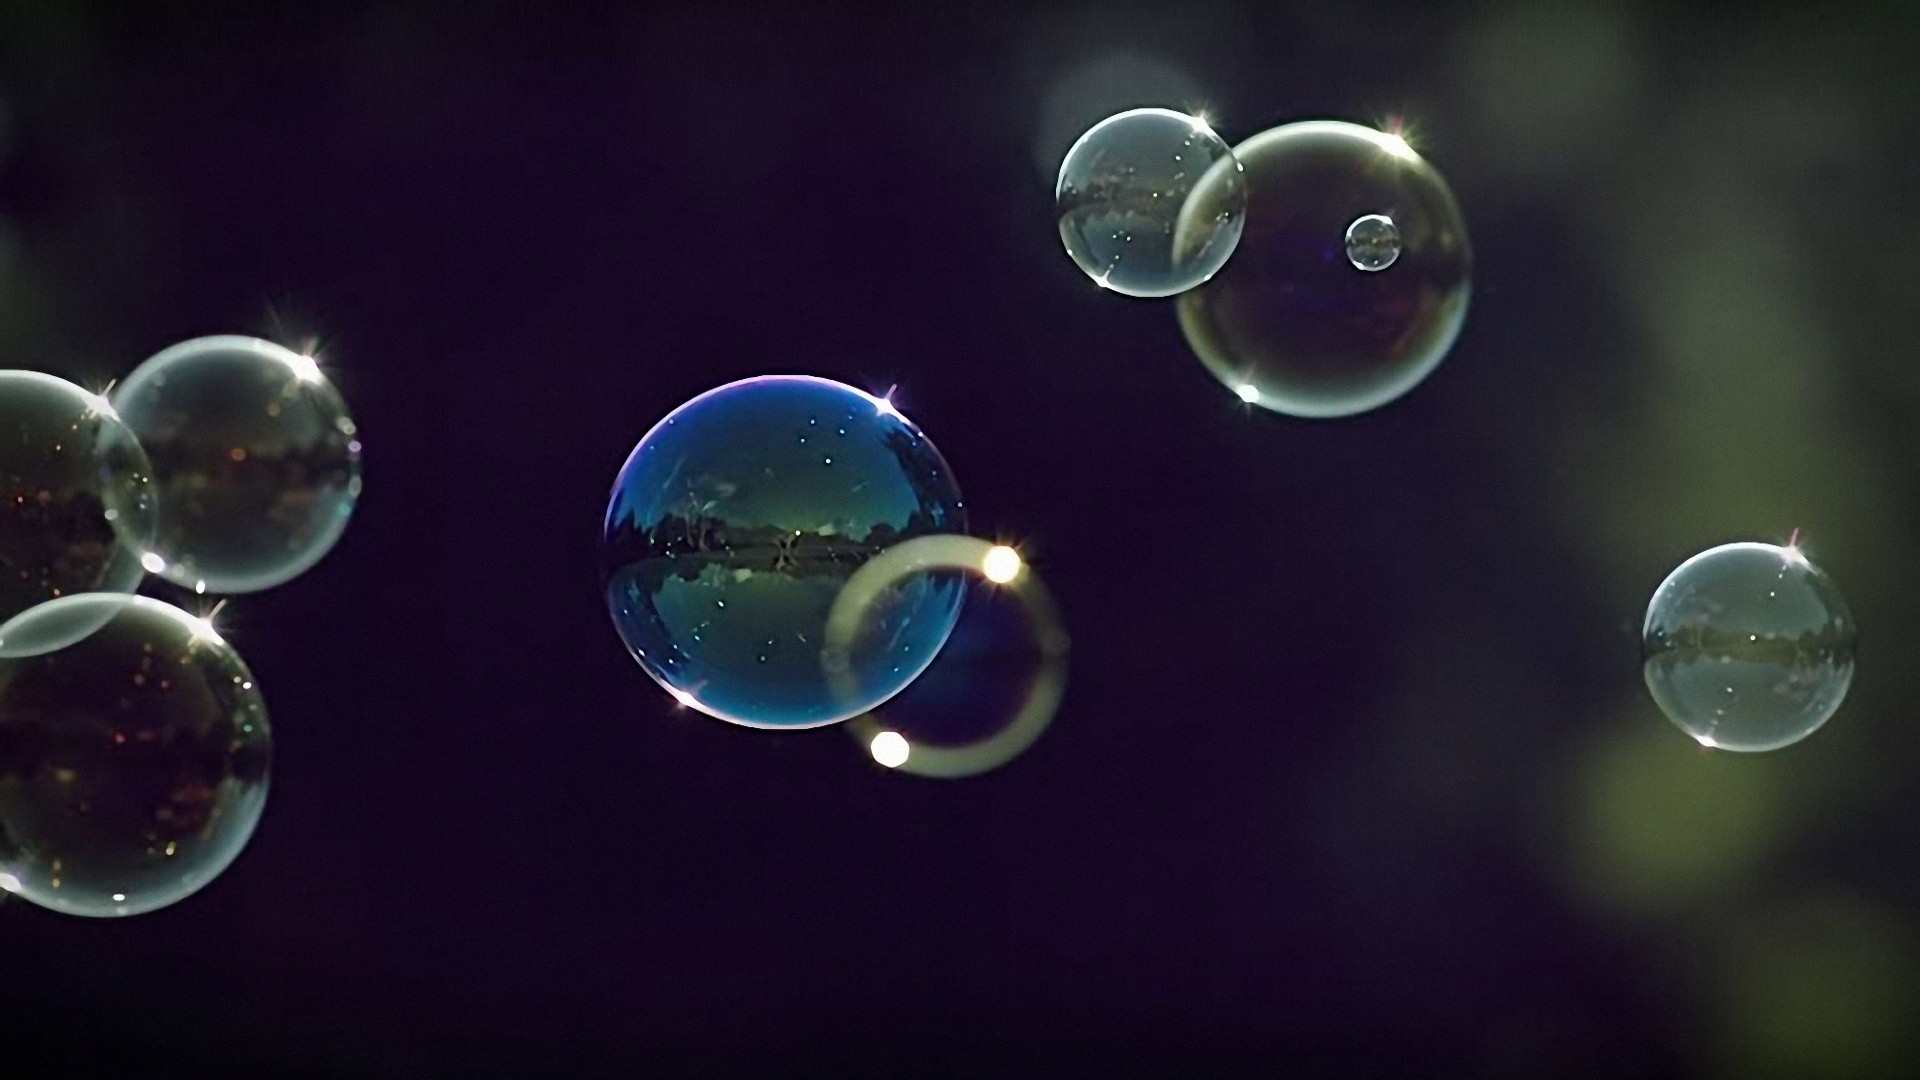 Bubbles Animated Wallpaper, Hd Bubbles Animated Wallpapers - Delusion Ft  Monna Fight For Love - 1920x1080 Wallpaper 